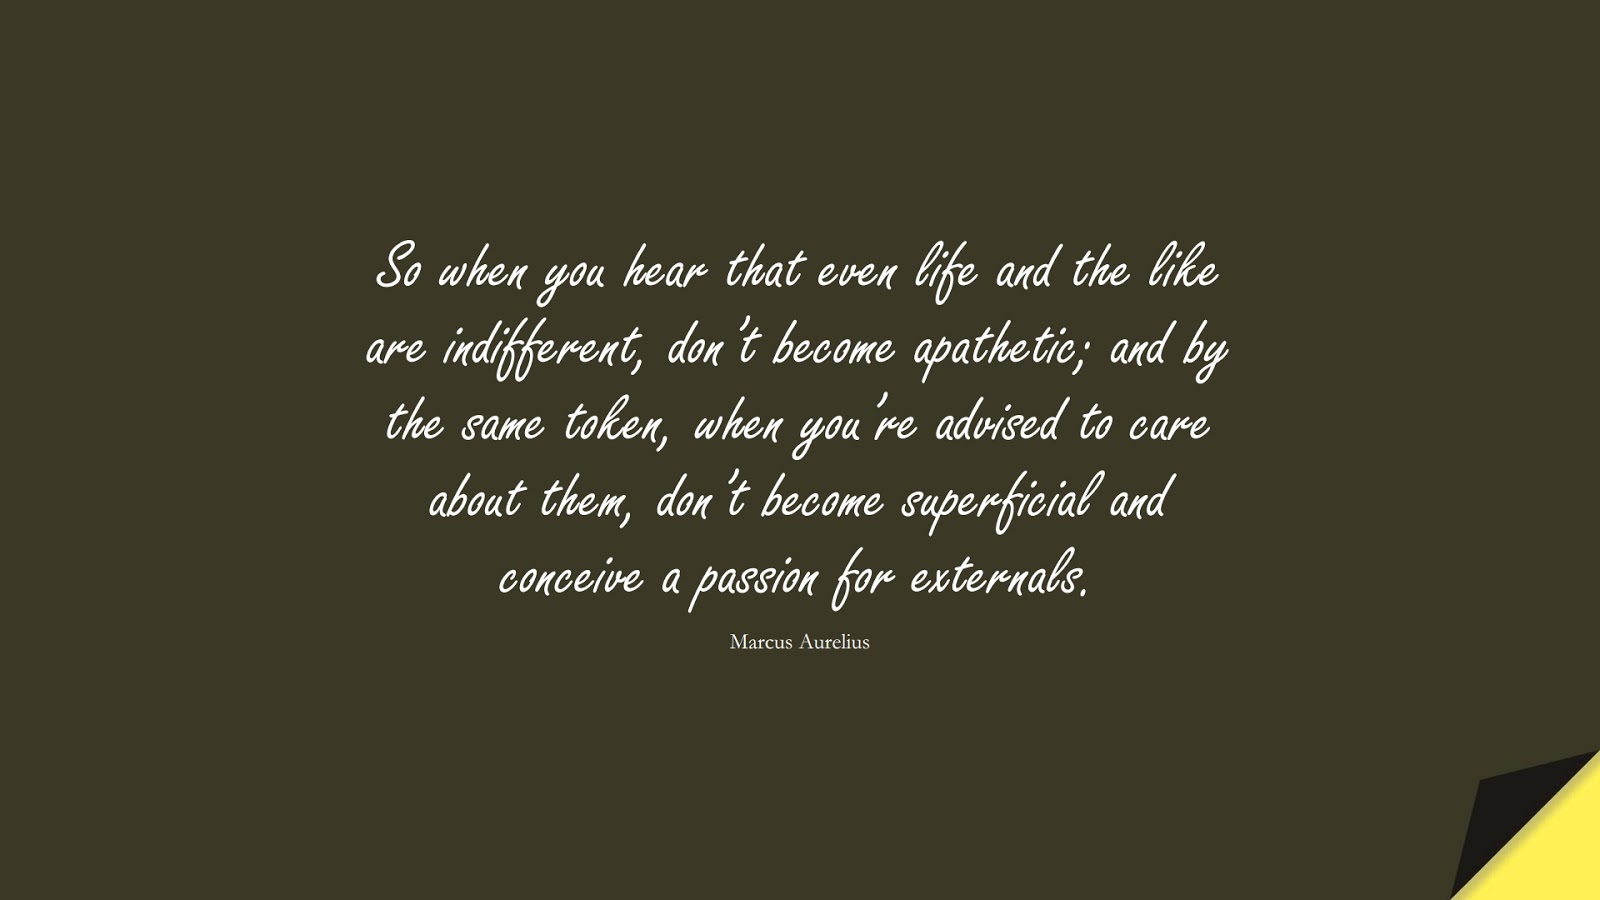 So when you hear that even life and the like are indifferent, don’t become apathetic; and by the same token, when you’re advised to care about them, don’t become superficial and conceive a passion for externals. (Marcus Aurelius);  #MarcusAureliusQuotes